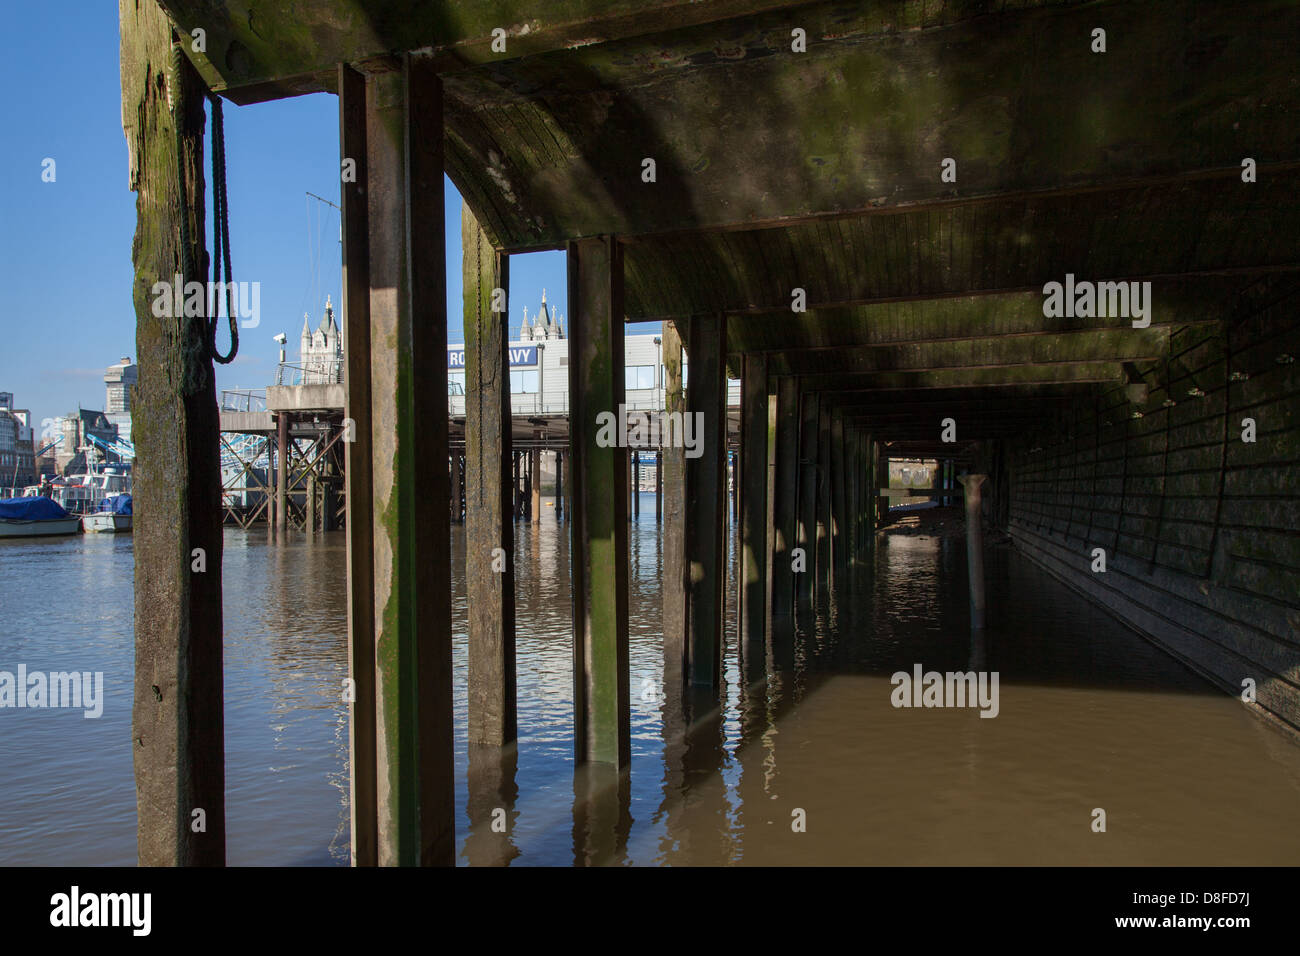 HMS President jetty seen from Thames foreshore, Tower Bridge in distance Stock Photo